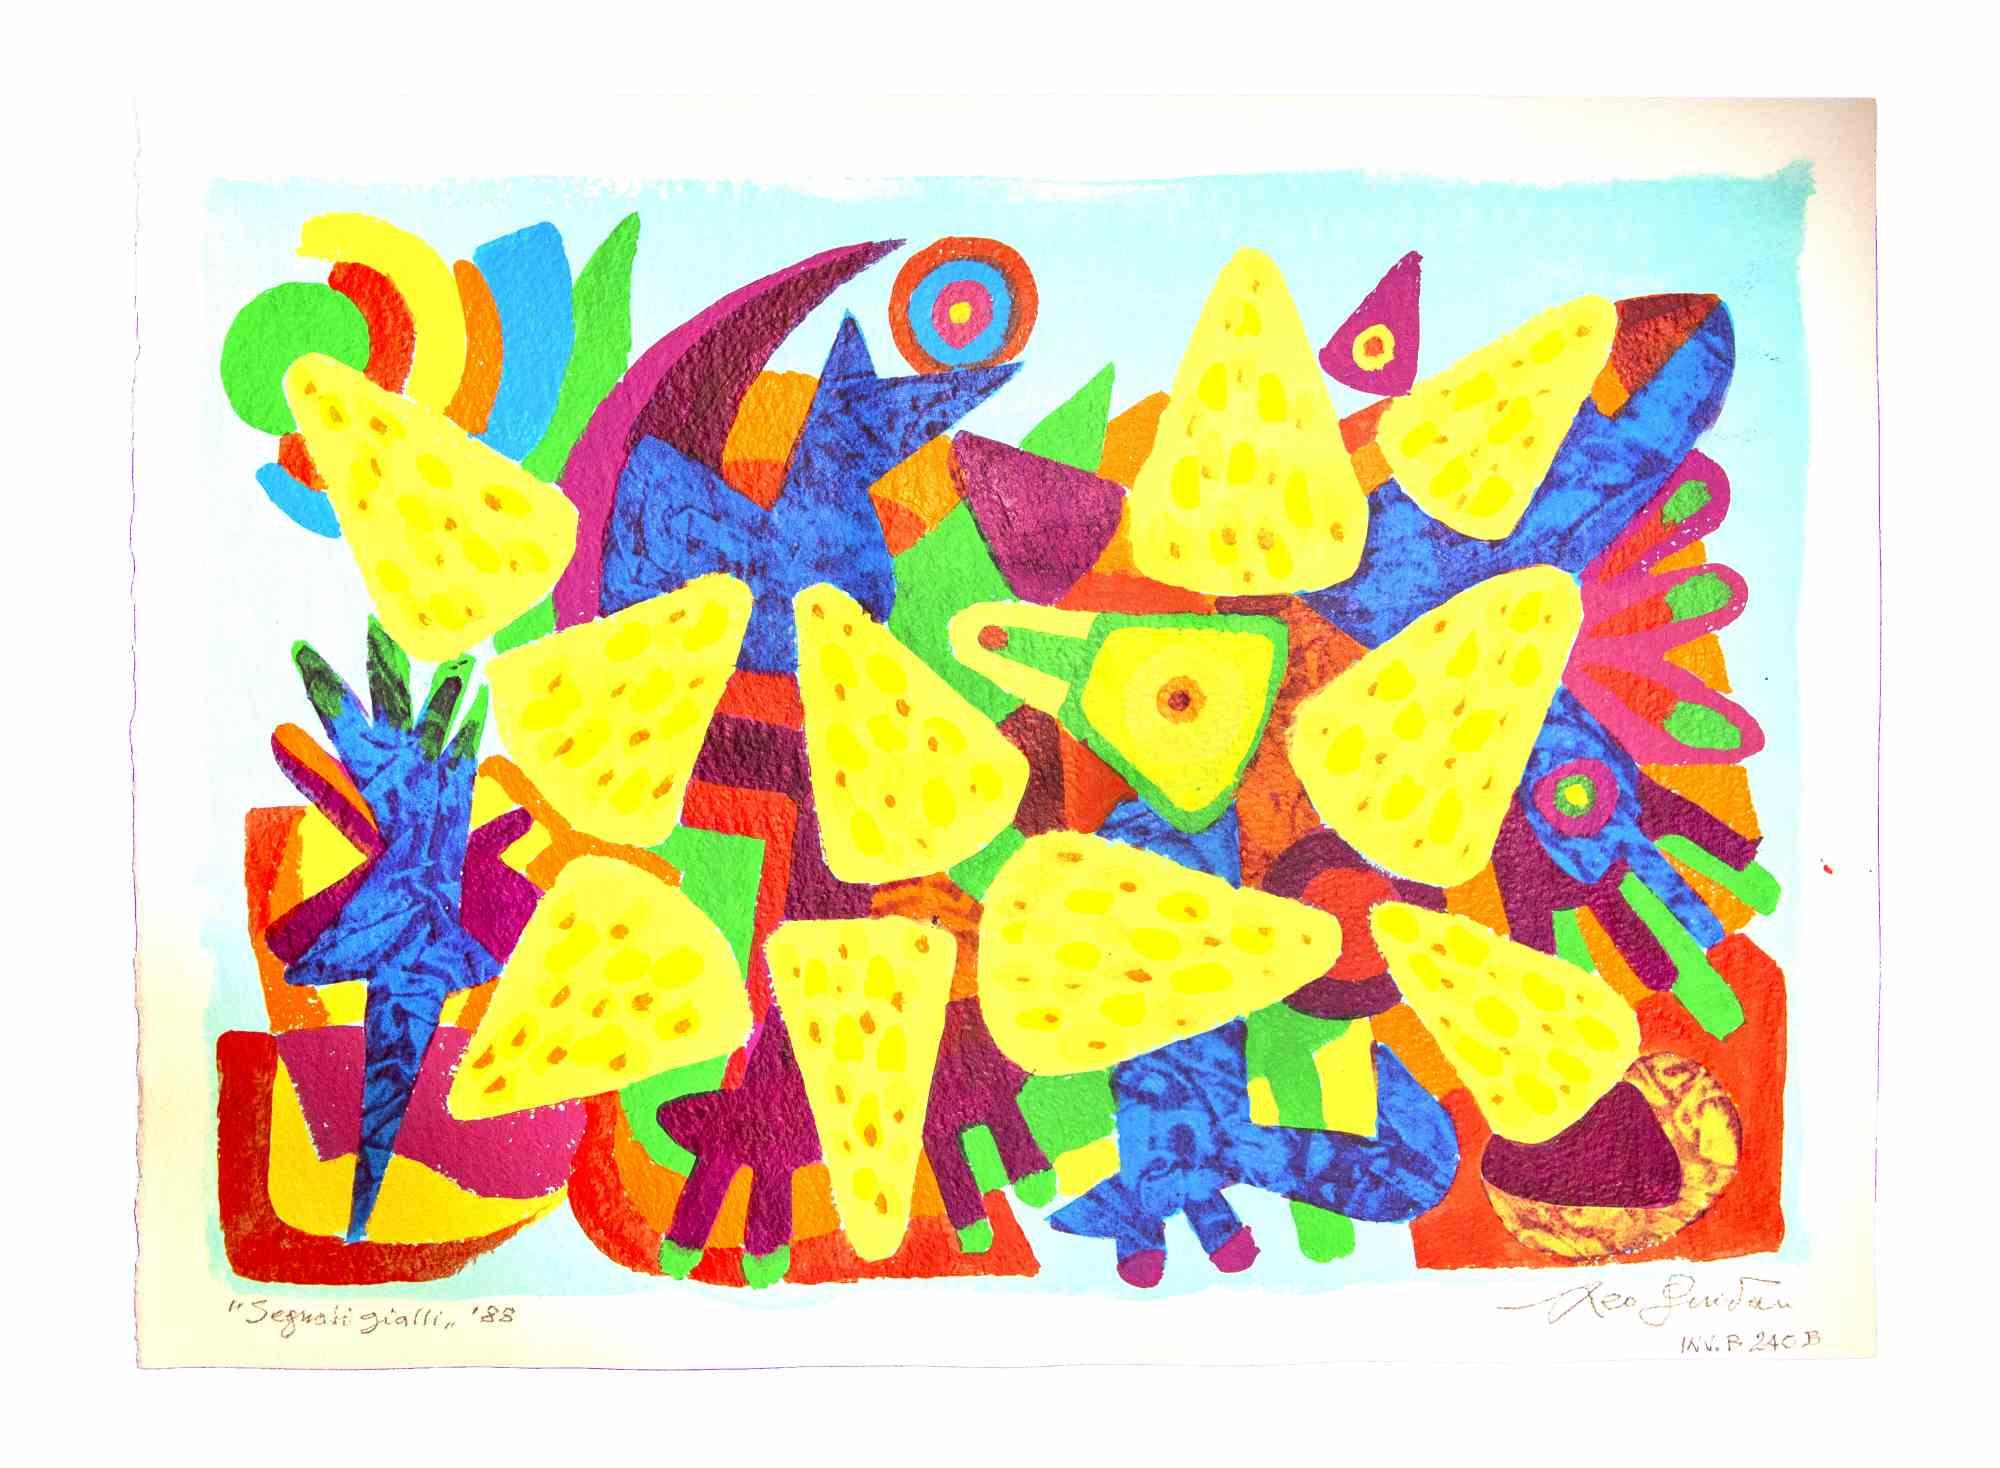 Segnali gialli is an original Contemporary artwork realized  in 1988  by the italian Contemporary artist  Leo Guida  (1992 - 2017).

Original drawing in beautiful colored tempera and watercolor on ivory-colored cardboard.
 
Hand-signed and dated on